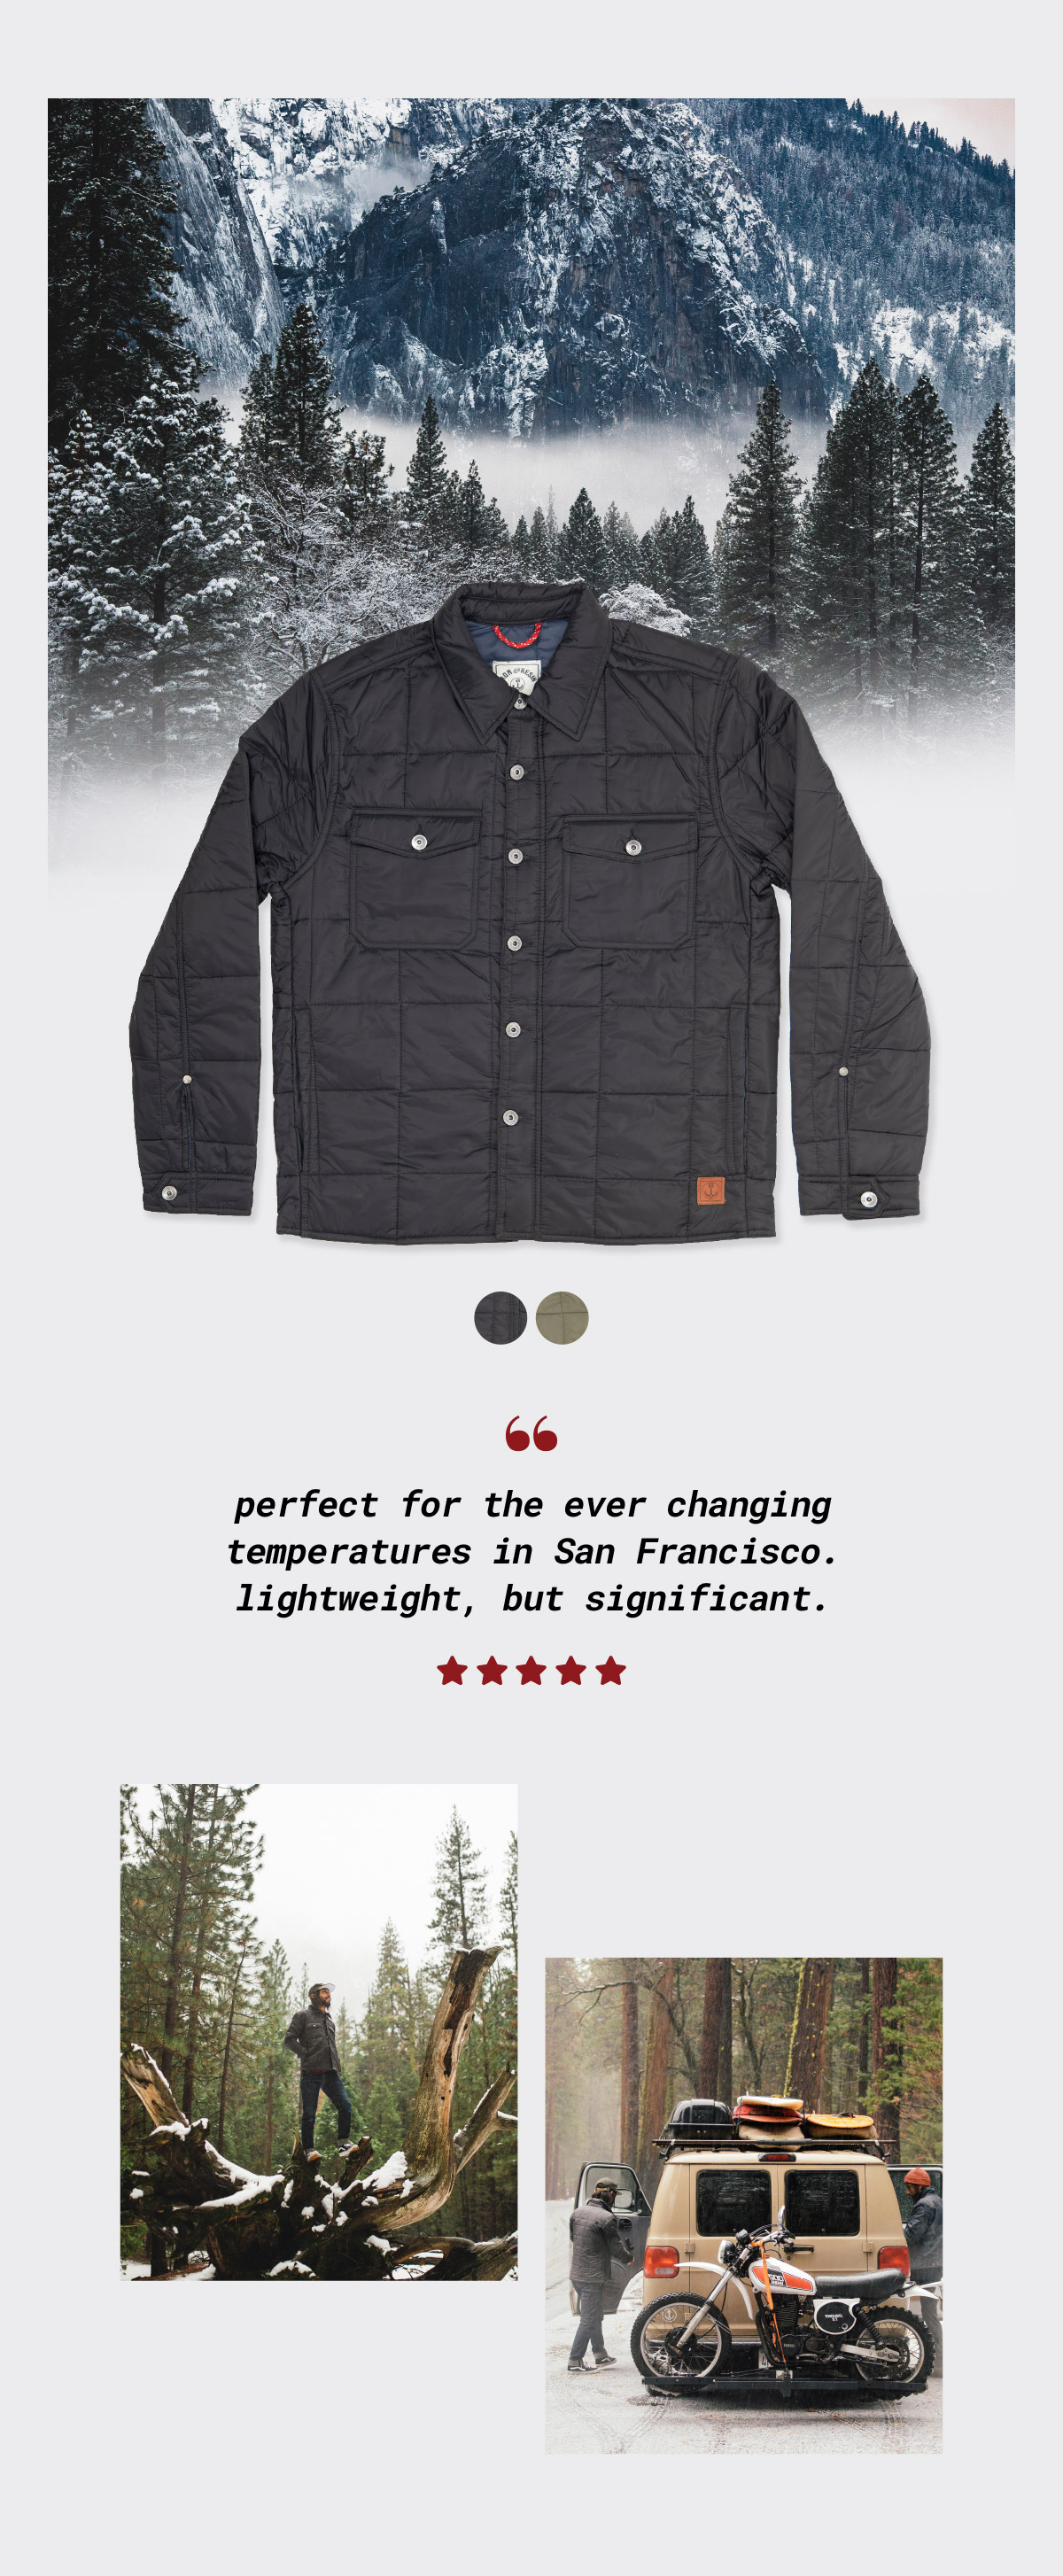  oo perfect for the ever changing temperatures in San Francisco. lightweight, but significant. 1 8. 8.8 